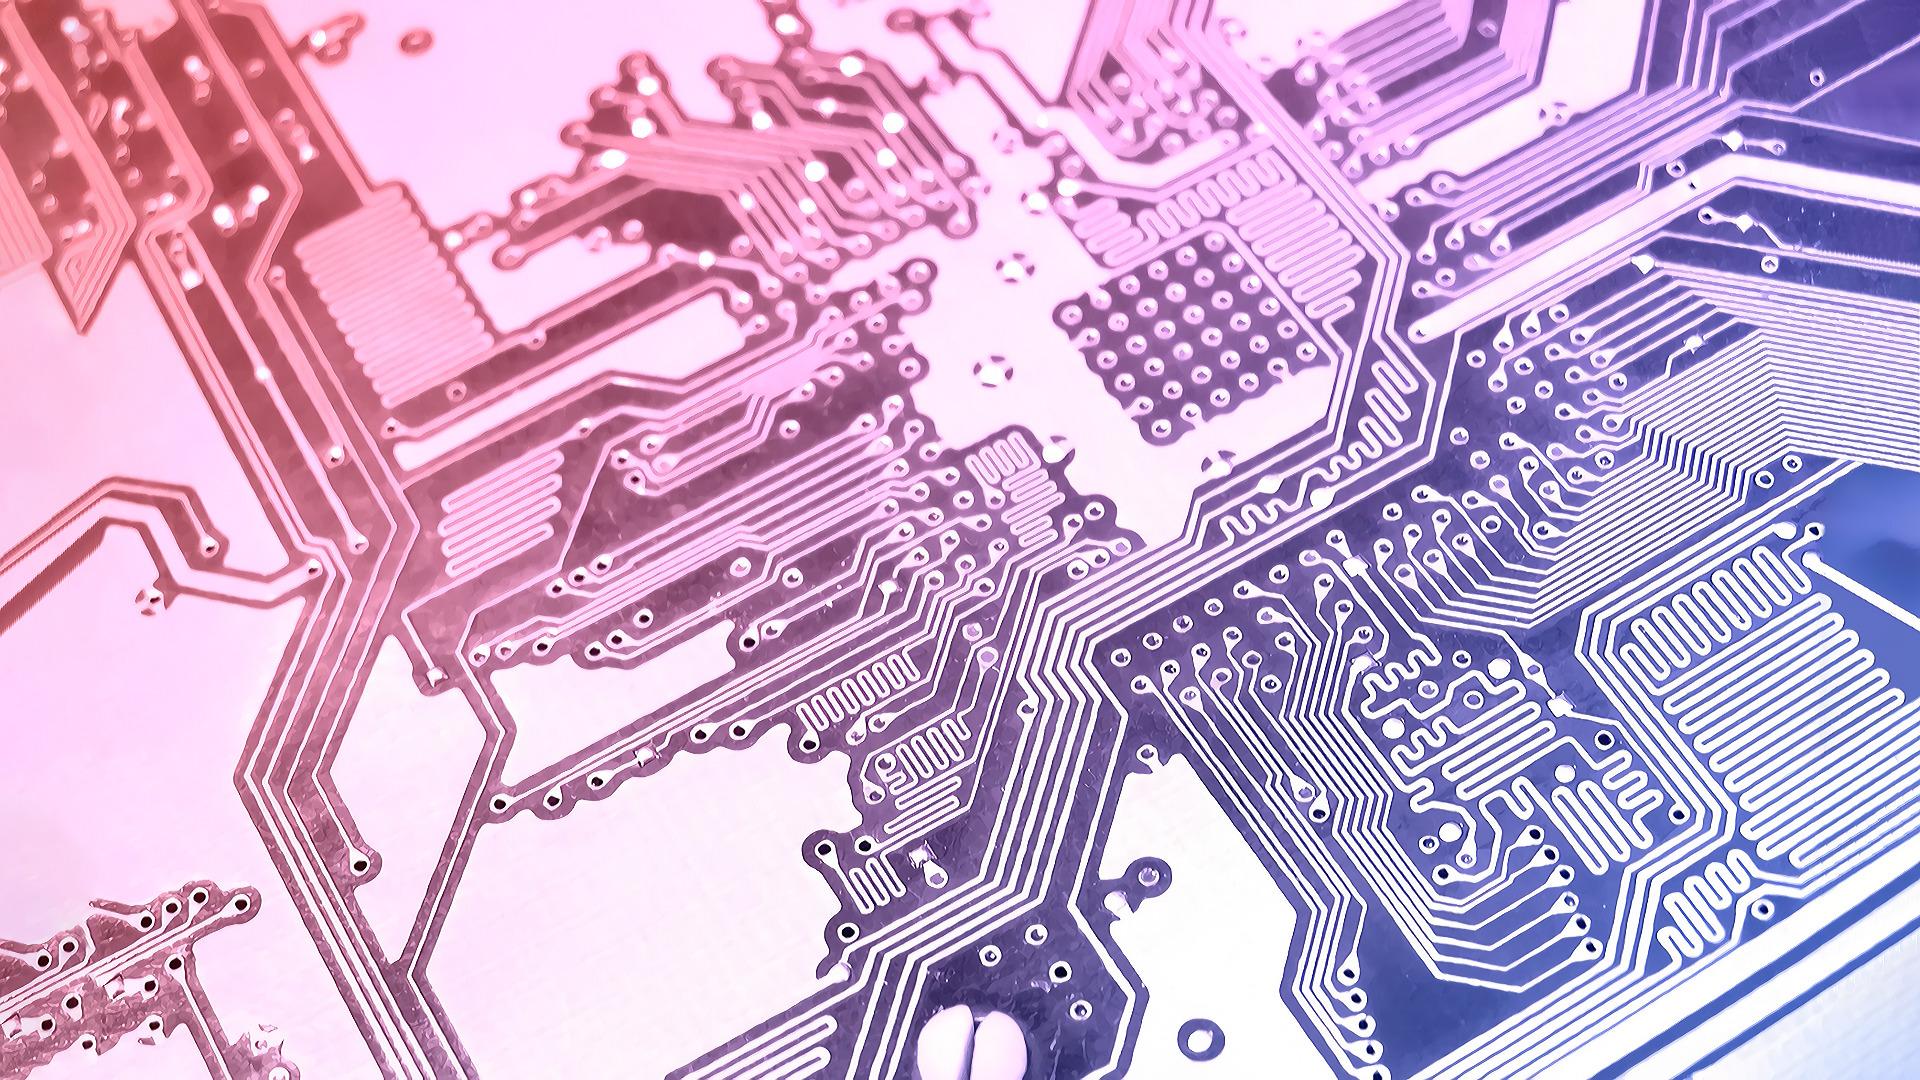 The colorful world of circuit boards [1920x1080]